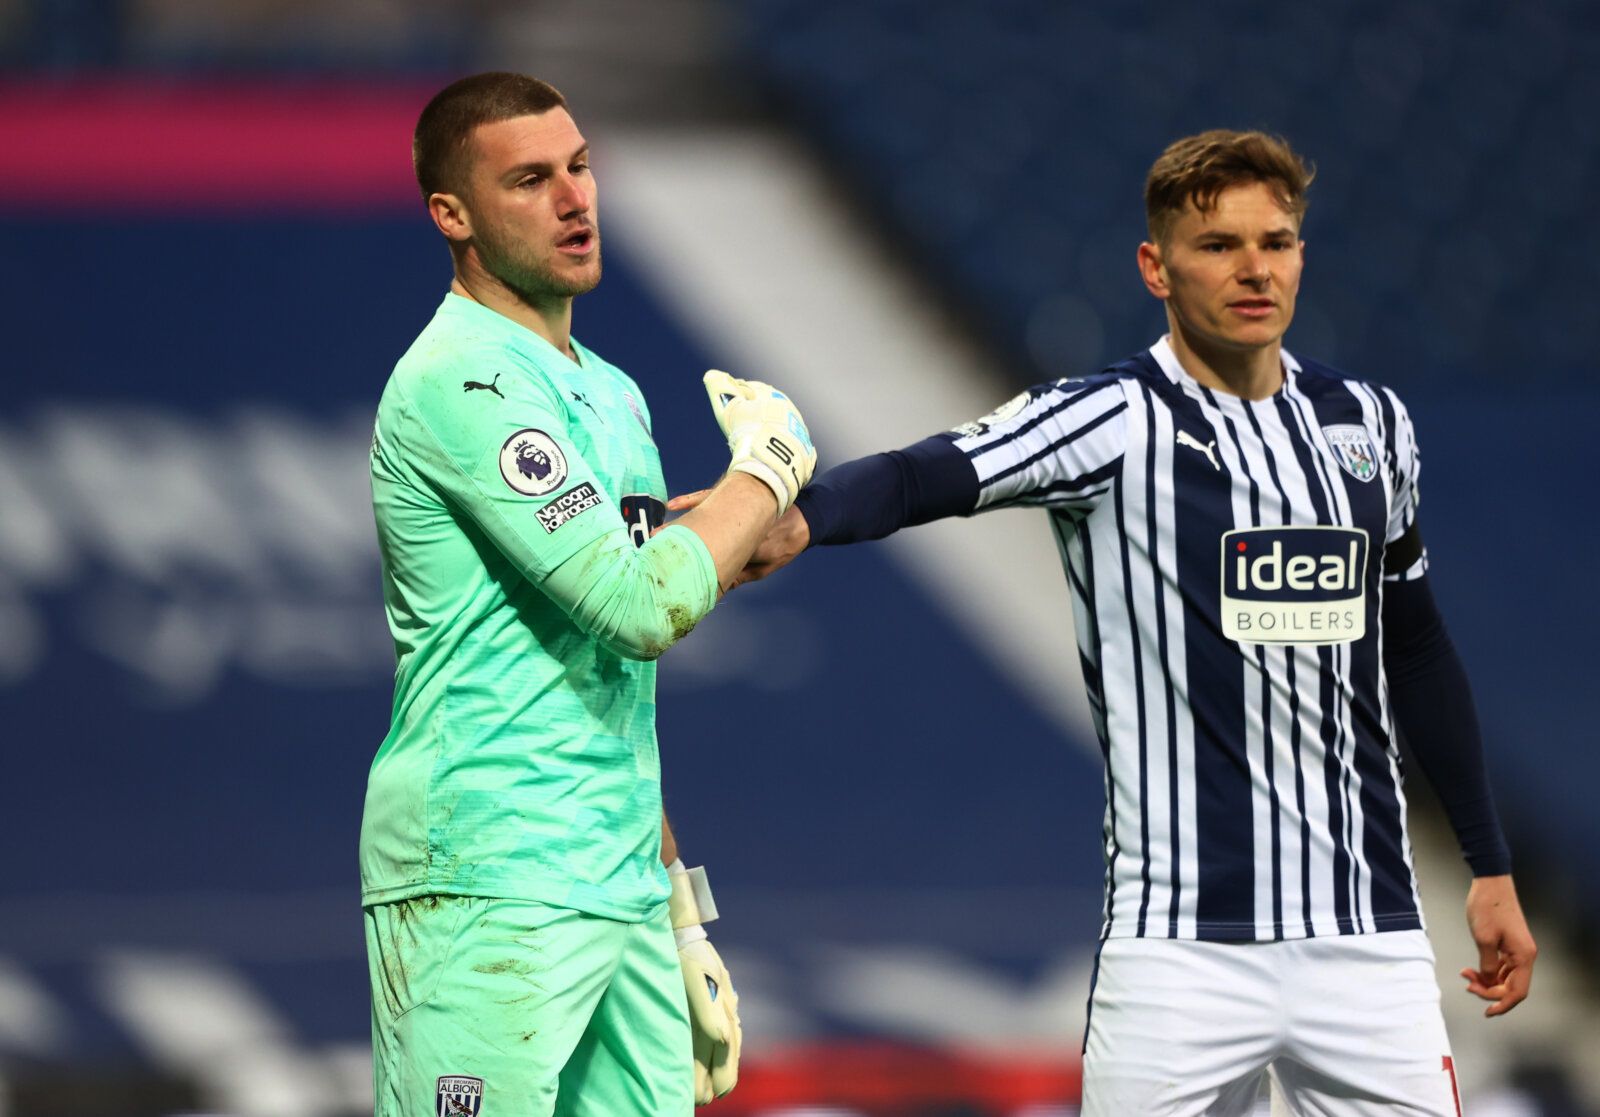 Soccer Football - Premier League - West Bromwich Albion v Southampton - The Hawthorns, West Bromwich, Britain - April 12, 2021 West Bromwich Albion's Conor Townsend with Sam Johnstone during the match Pool via REUTERS/Michael Steele EDITORIAL USE ONLY. No use with unauthorized audio, video, data, fixture lists, club/league logos or 'live' services. Online in-match use limited to 75 images, no video emulation. No use in betting, games or single club /league/player publications.  Please contact yo